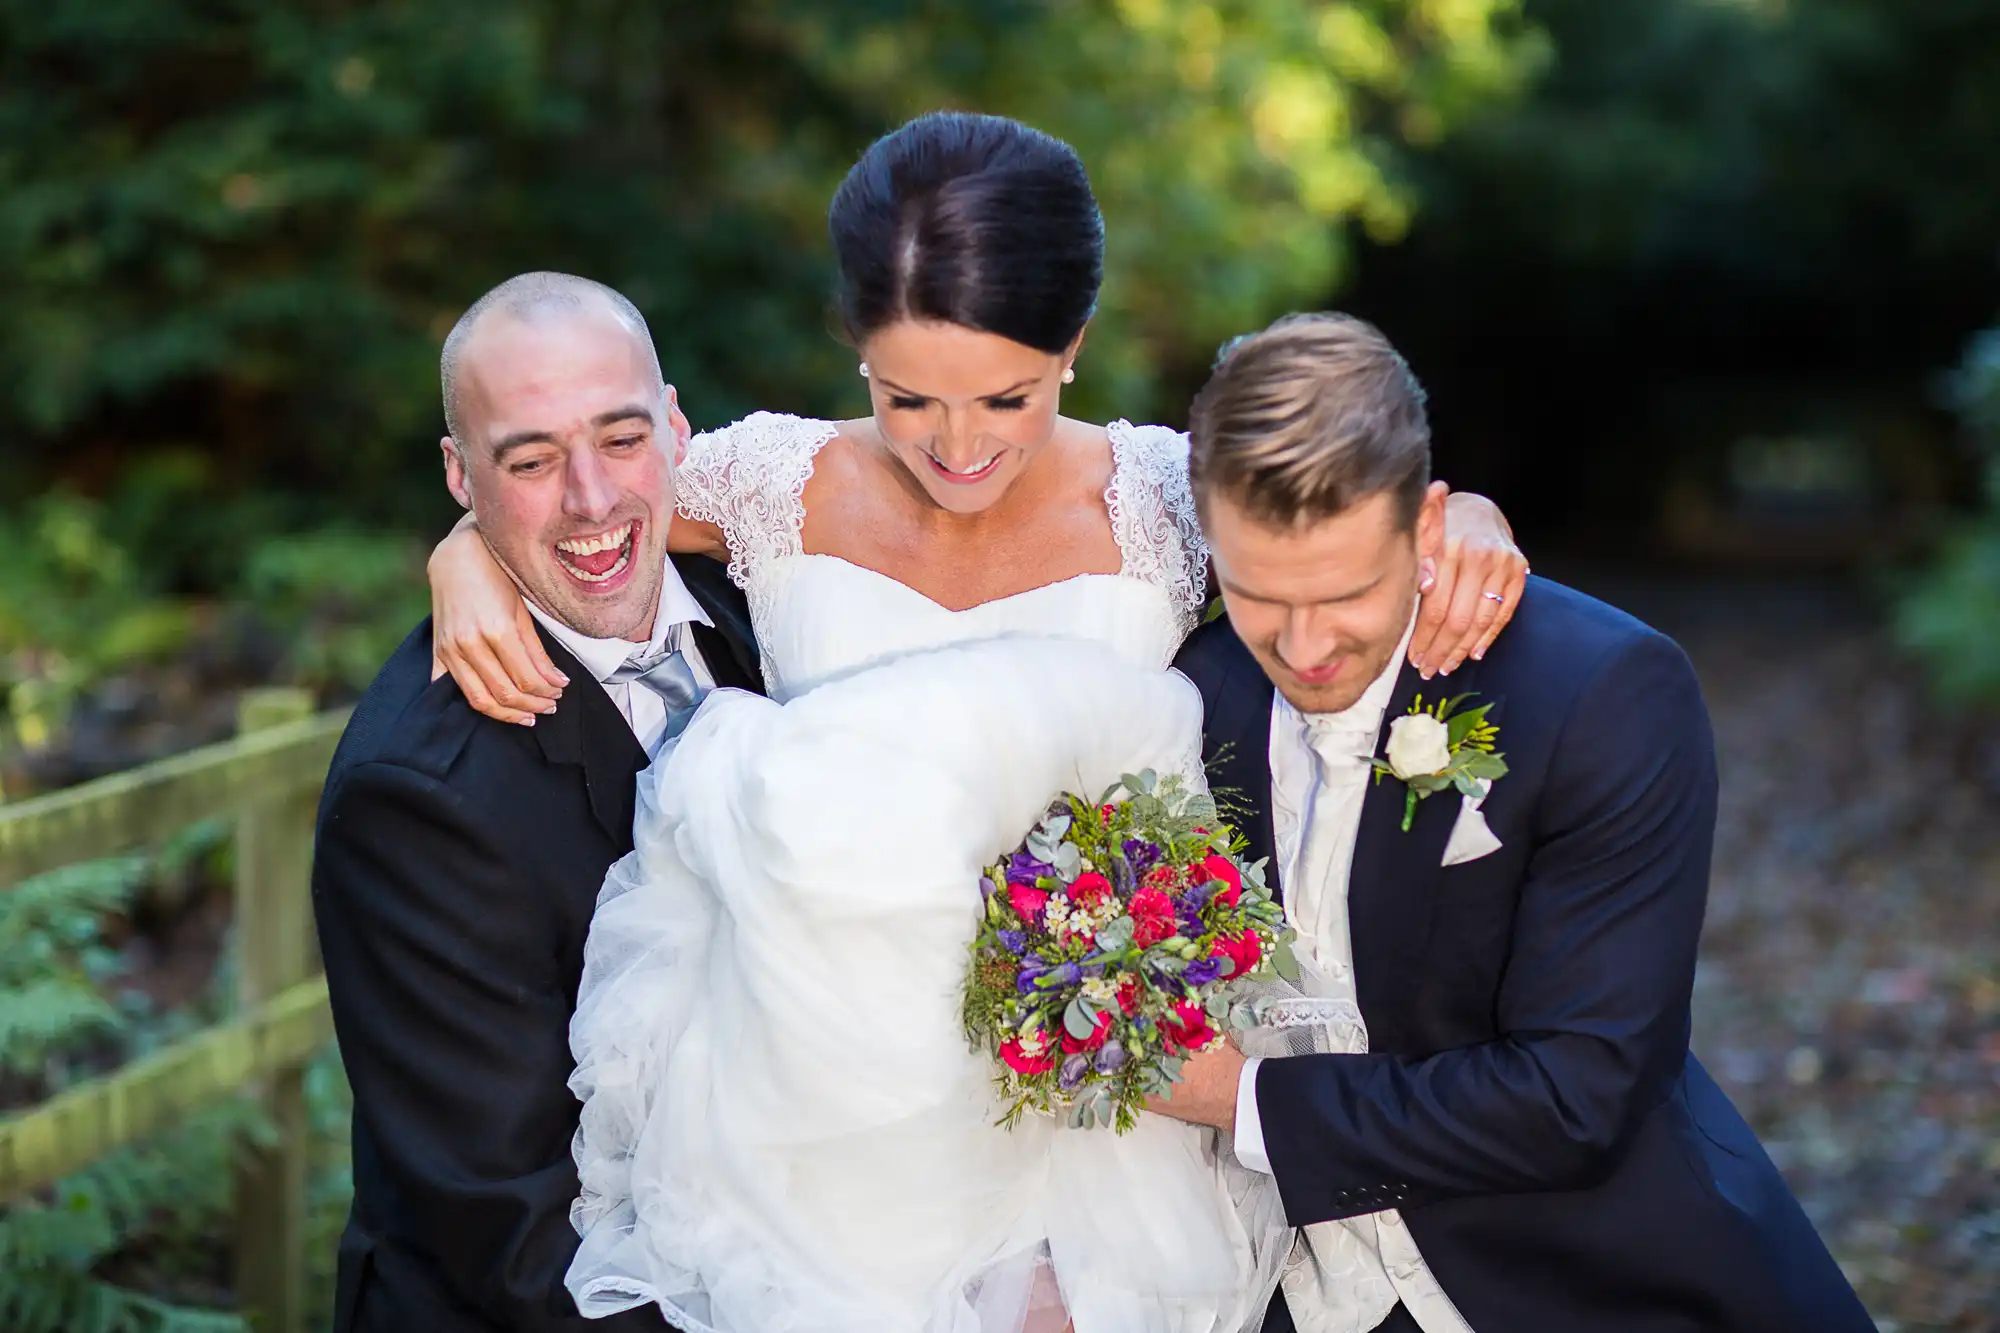 Bride laughing joyfully, flanked by two men in suits, one on either side, all holding a colorful bouquet in a sunlit garden setting.